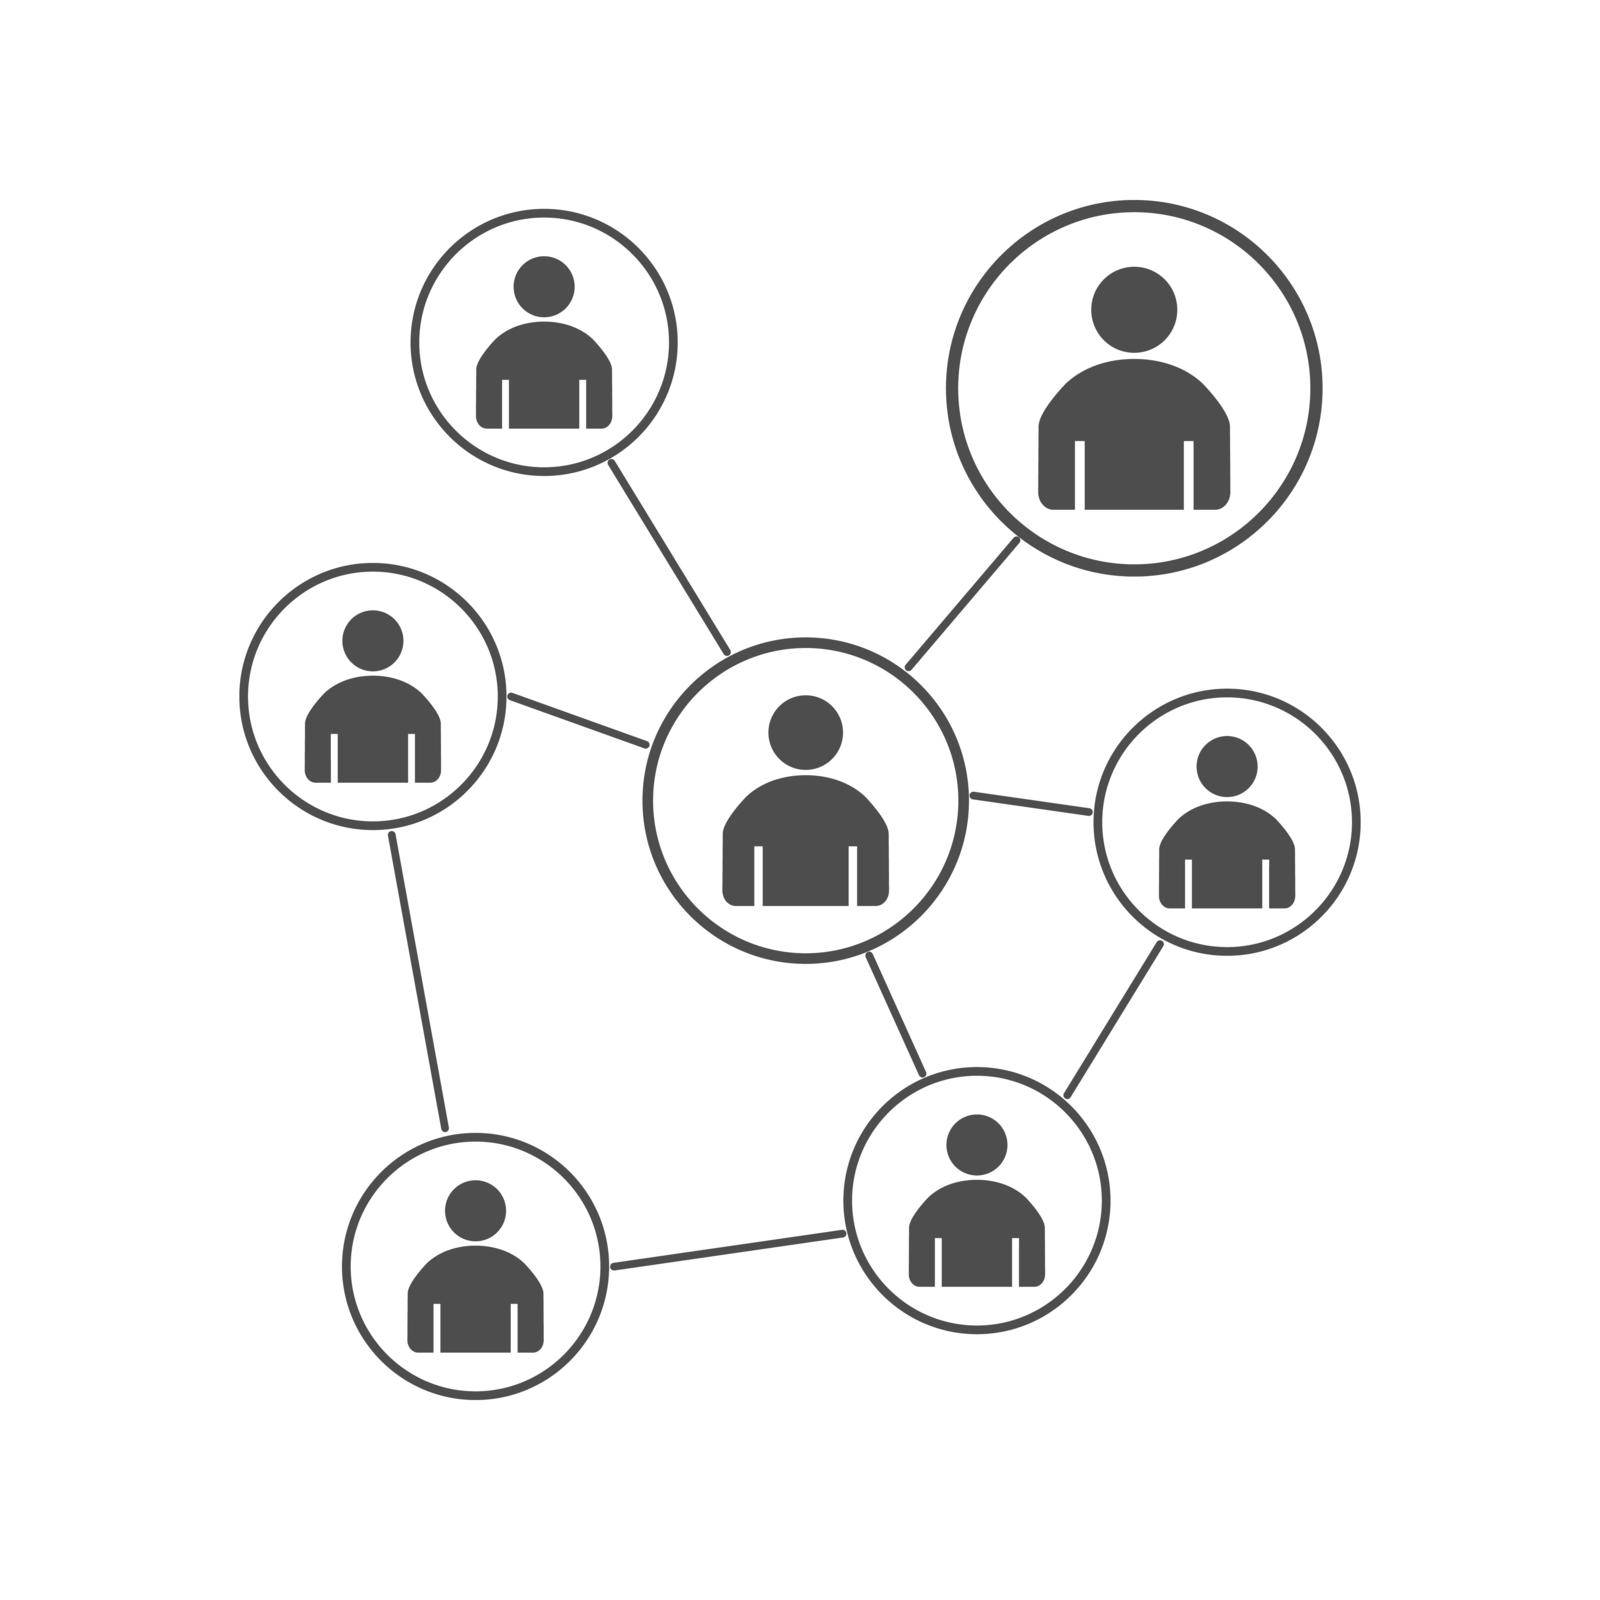 People connecting icon. Network sign. Vector illustration flat